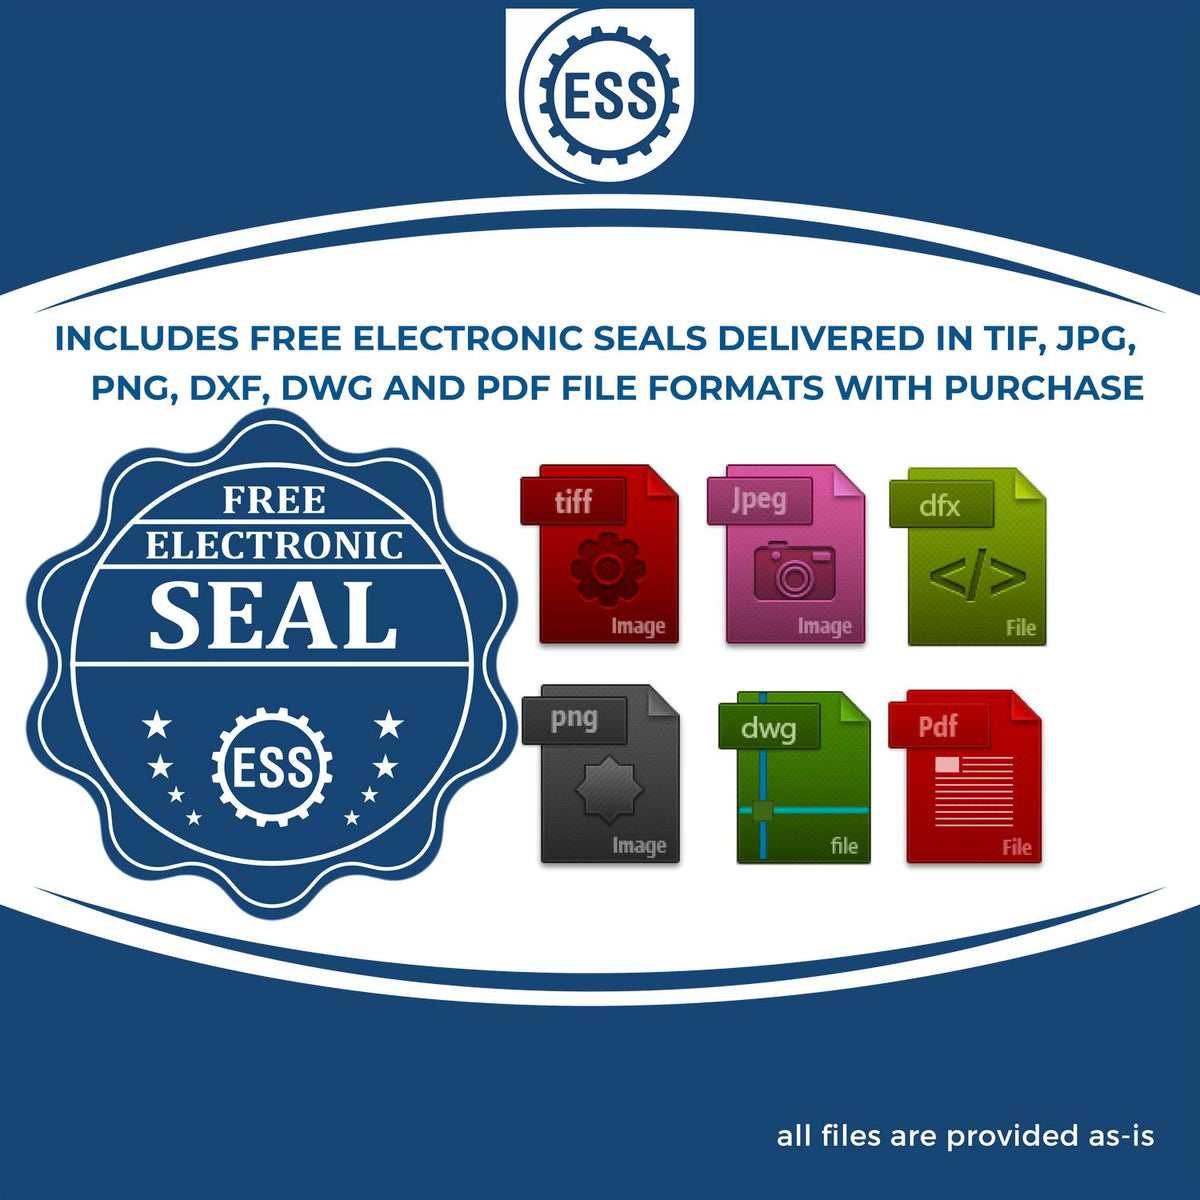 An infographic for the free electronic seal for the Hybrid Vermont Landscape Architect Seal illustrating the different file type icons such as DXF, DWG, TIF, JPG and PNG.